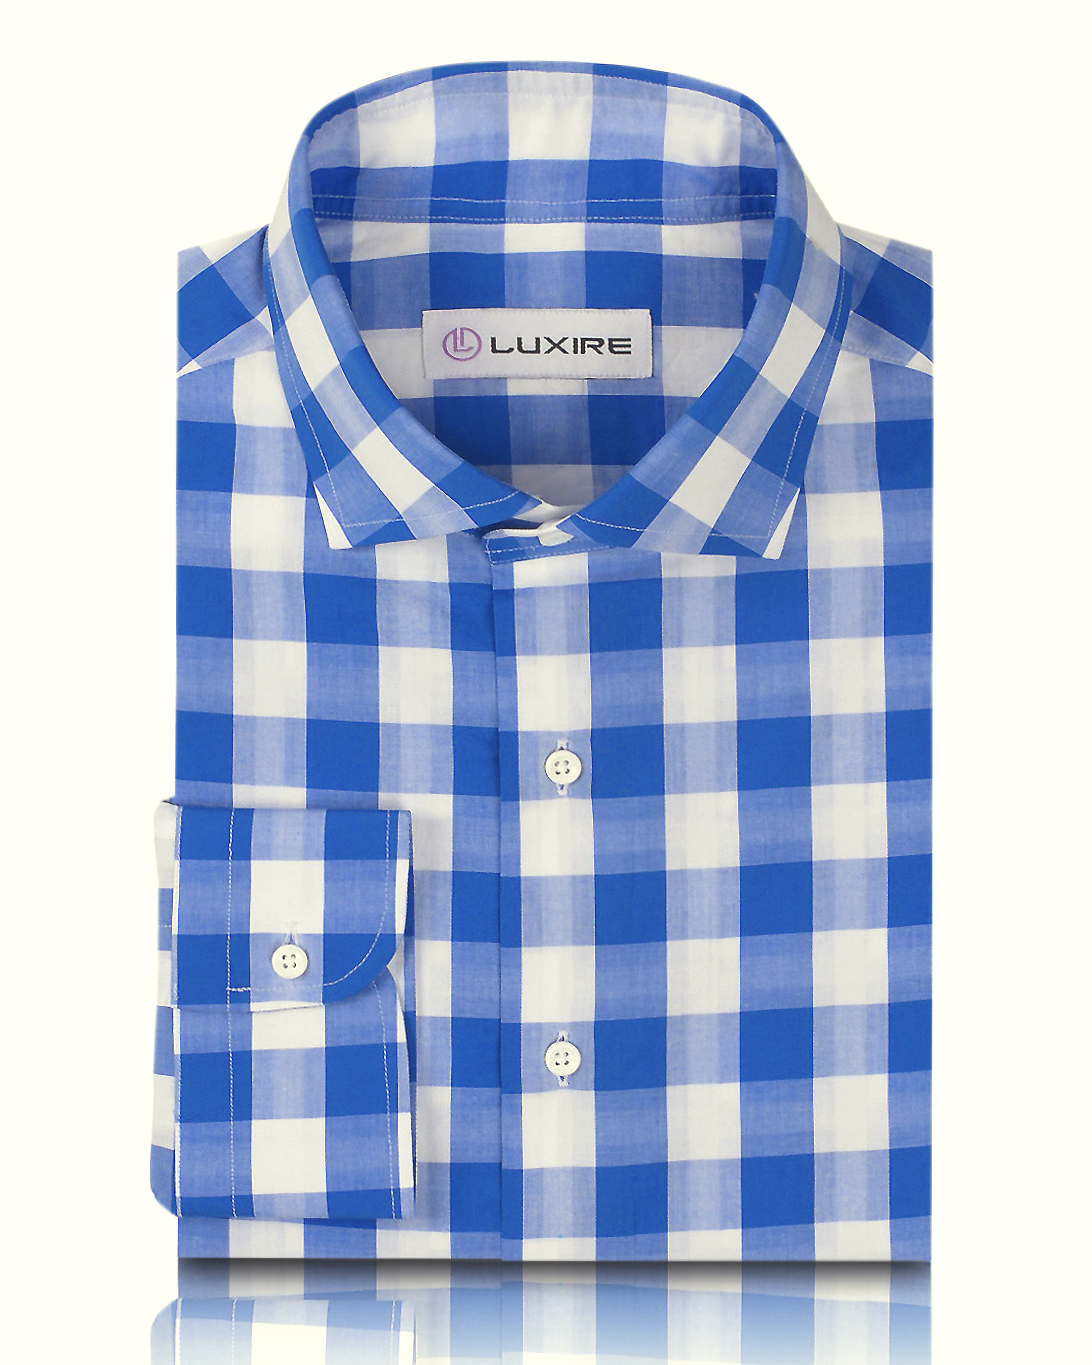 Front view of custom check shirts for men by Luxire in blue white macro